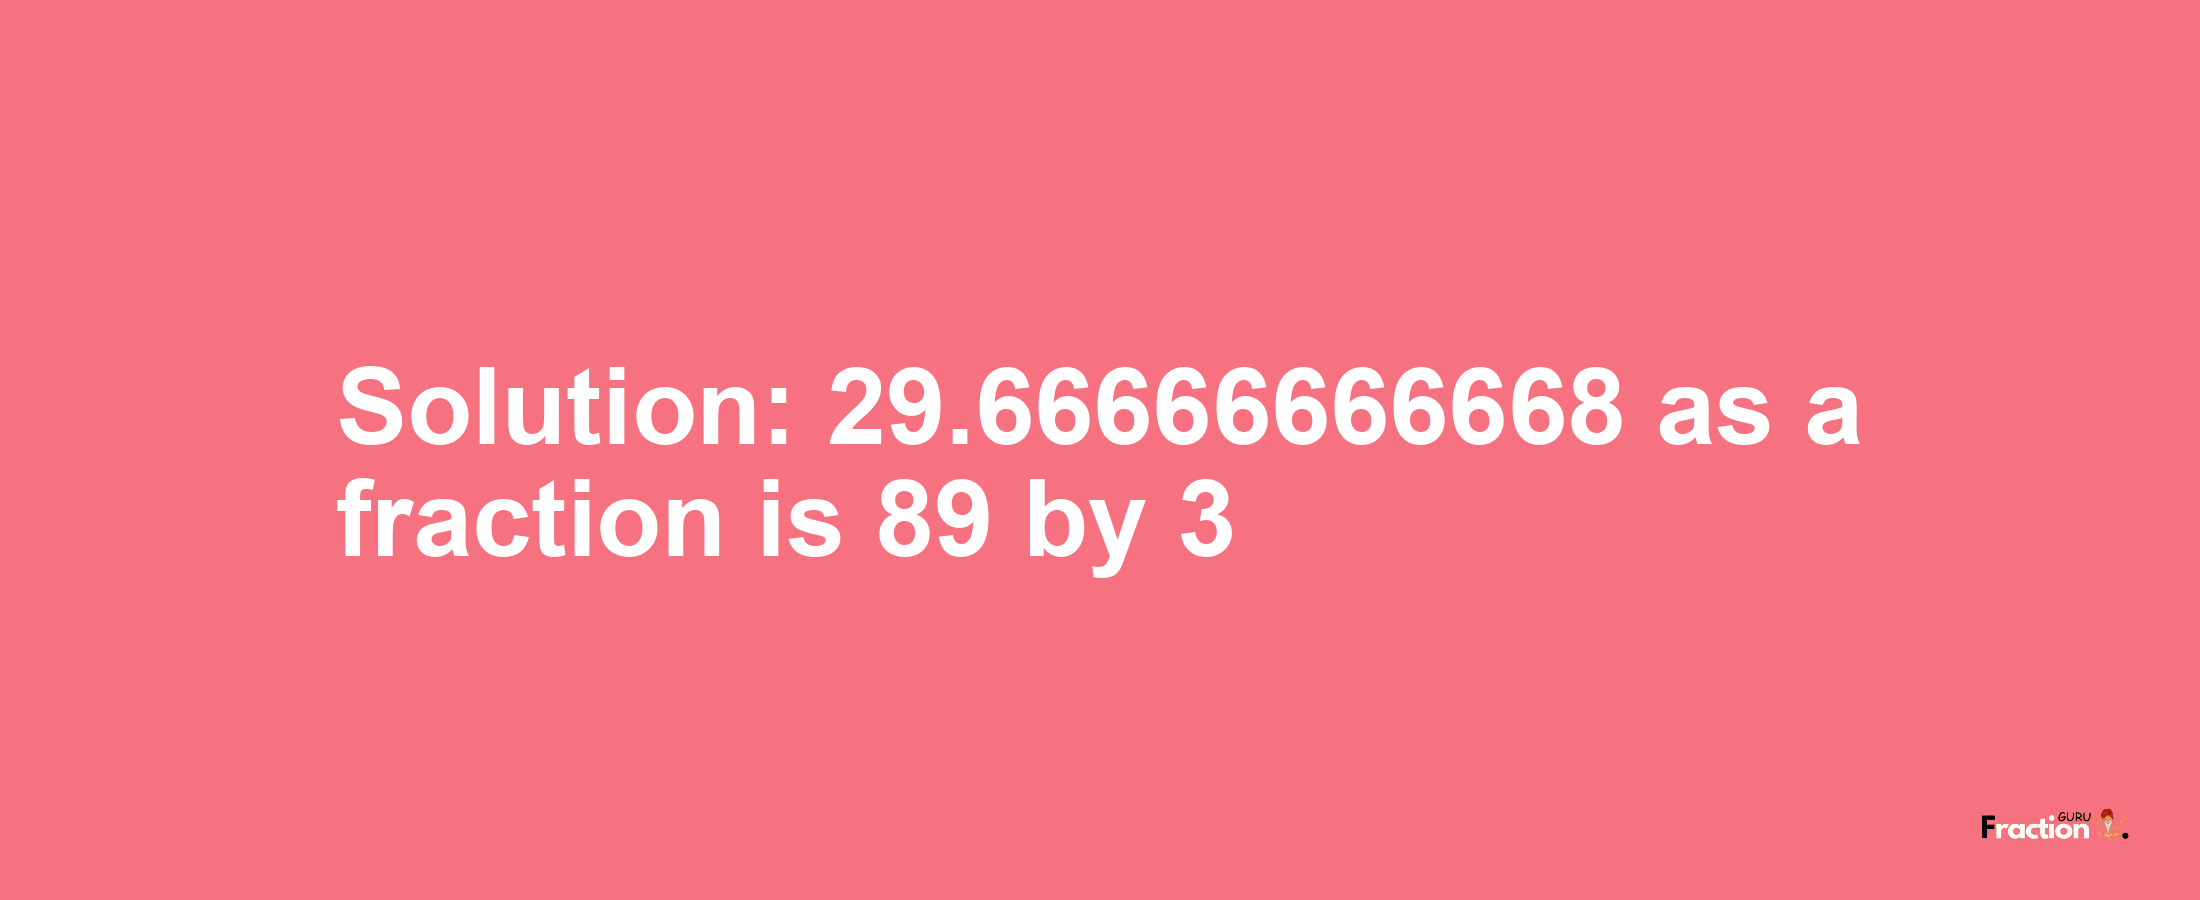 Solution:29.66666666668 as a fraction is 89/3